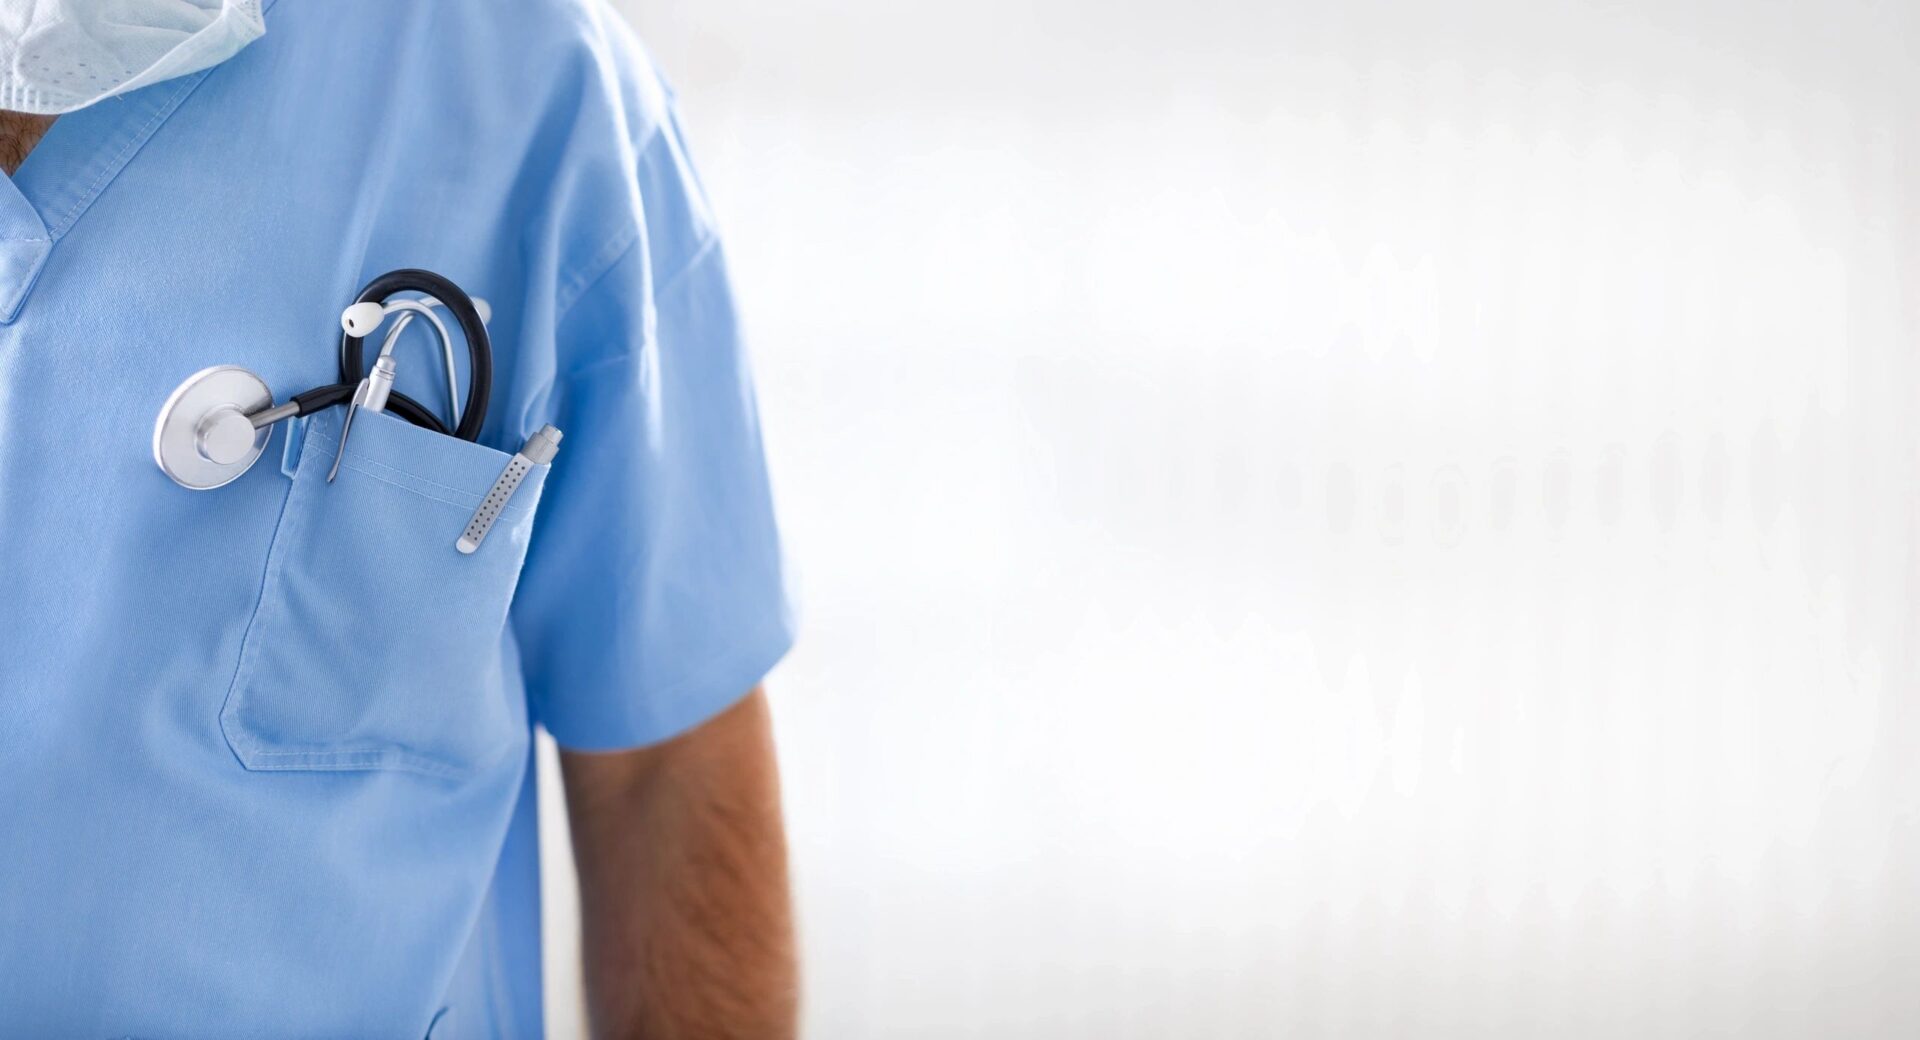 A person in blue scrubs holding a stethoscope.